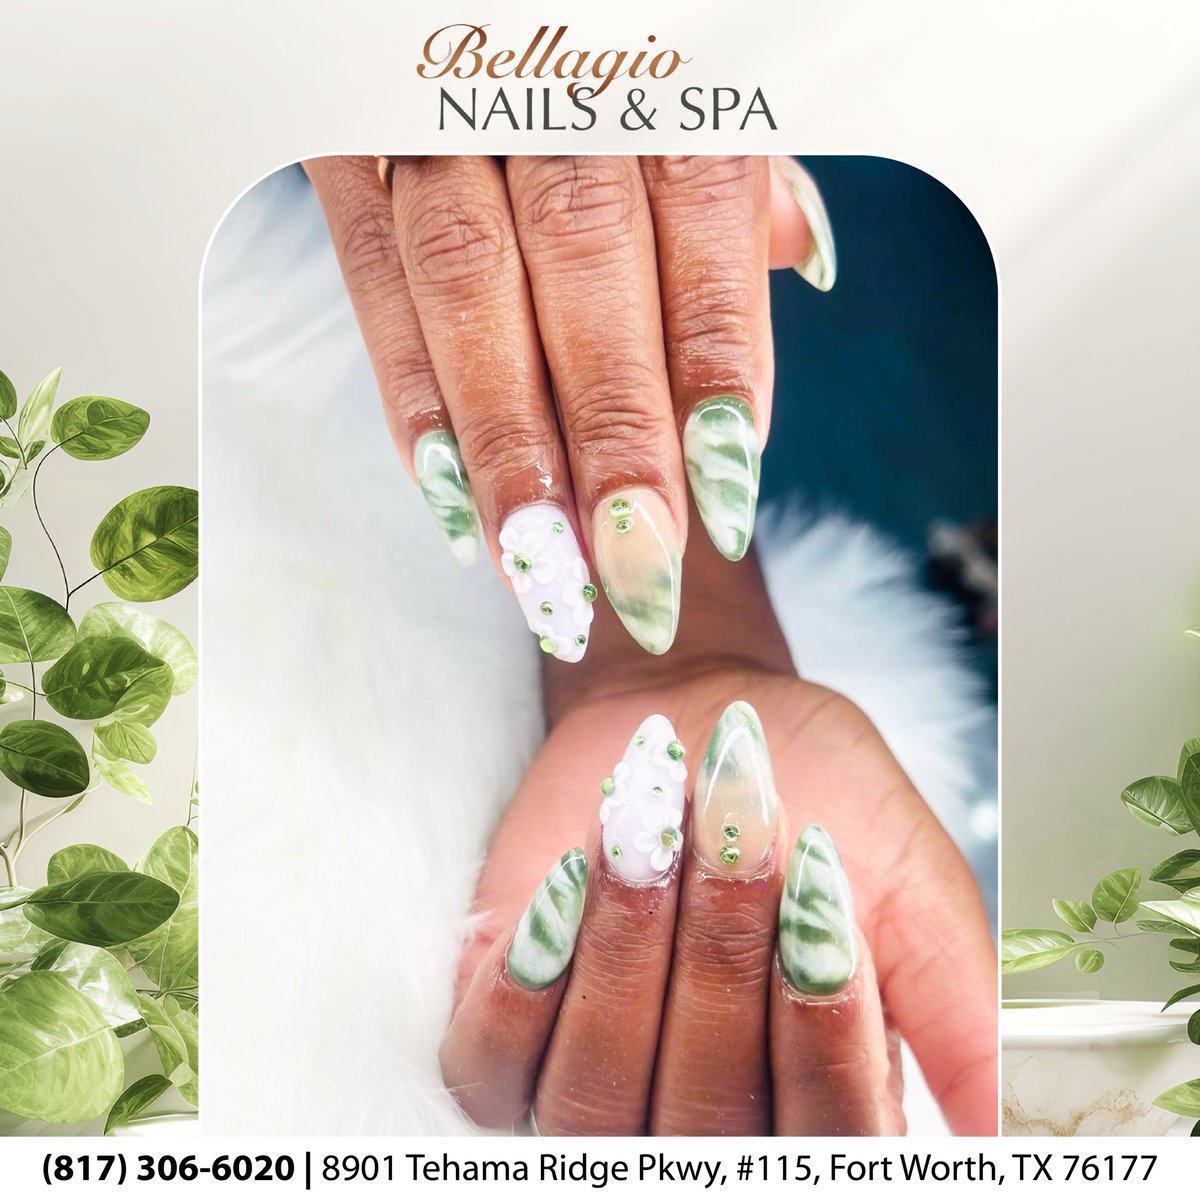 Blooming elegance! Loving the mix of classic marble and delicate florals on my nails.🌸🌿
#bellagionailspa #bellagiotx #bellagionails #bellagiofortworth #nailsalonfortworth #nailsalontx #nail #nailsoftheday #longnails #naildesign #nailsalonnearme #glitternails #nailsalon